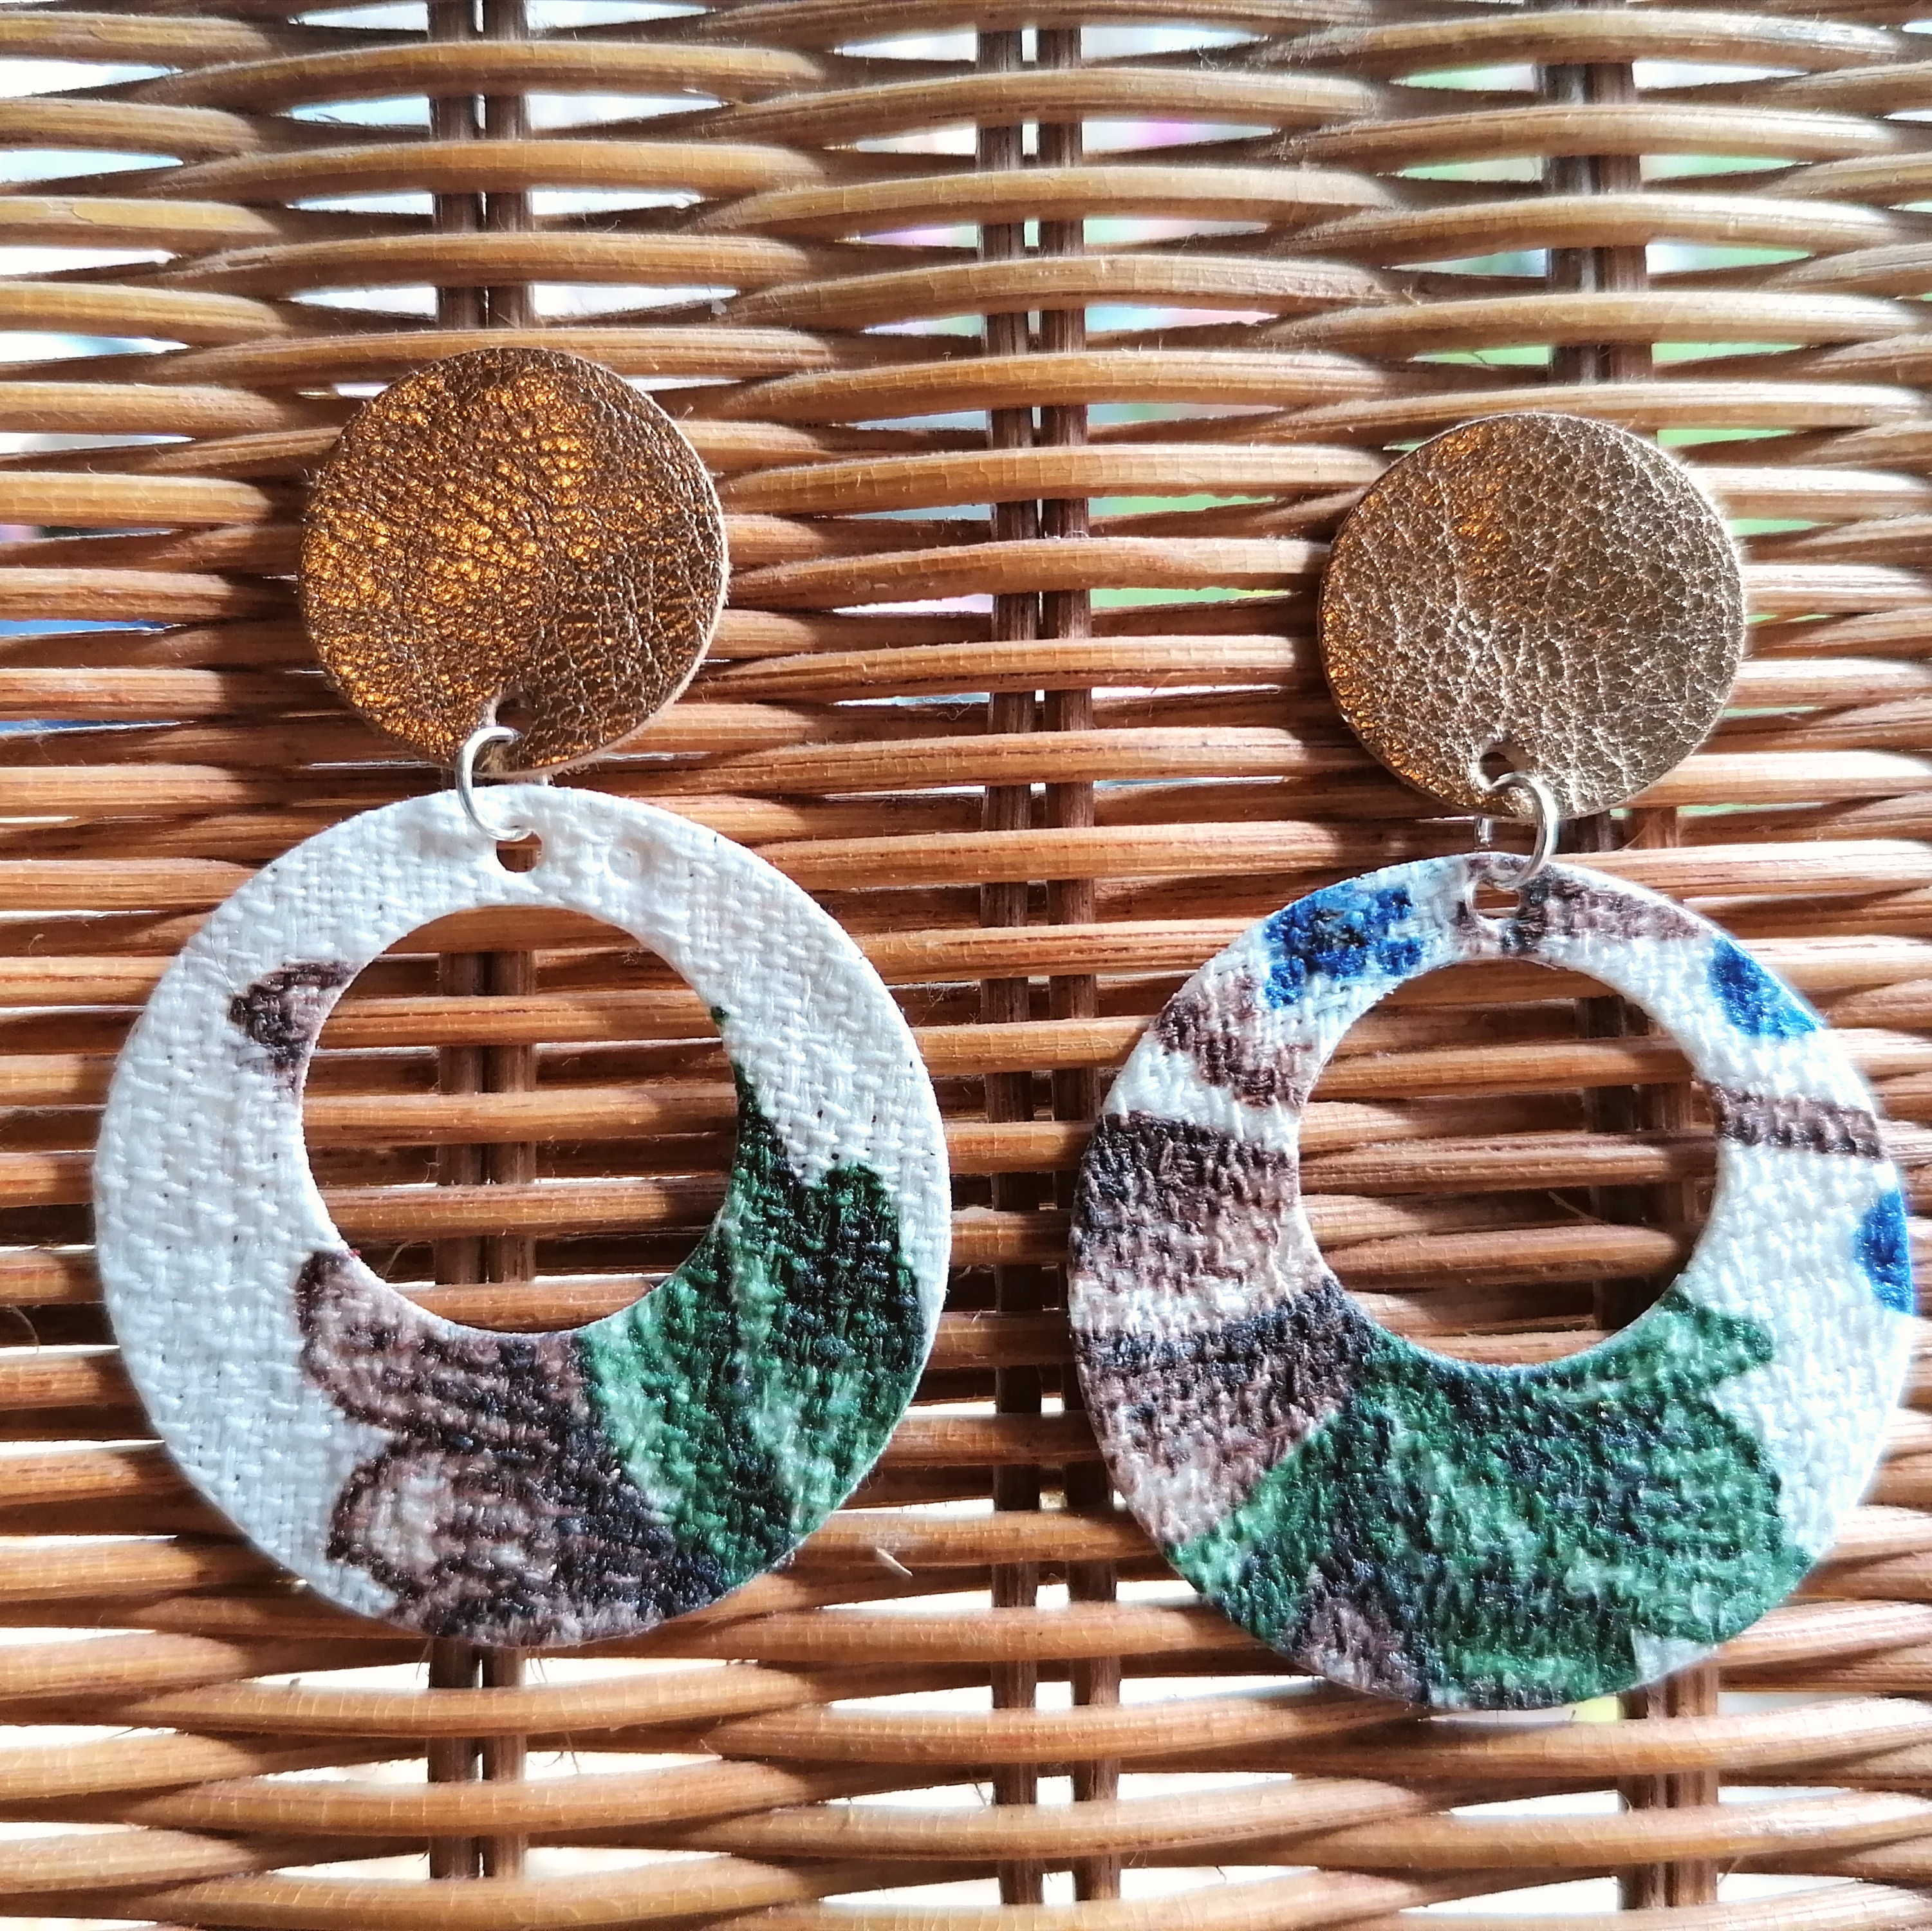 Recycled Vintage Fabric and Leather Stud Earrings- Gold and Old Fashioned Floral